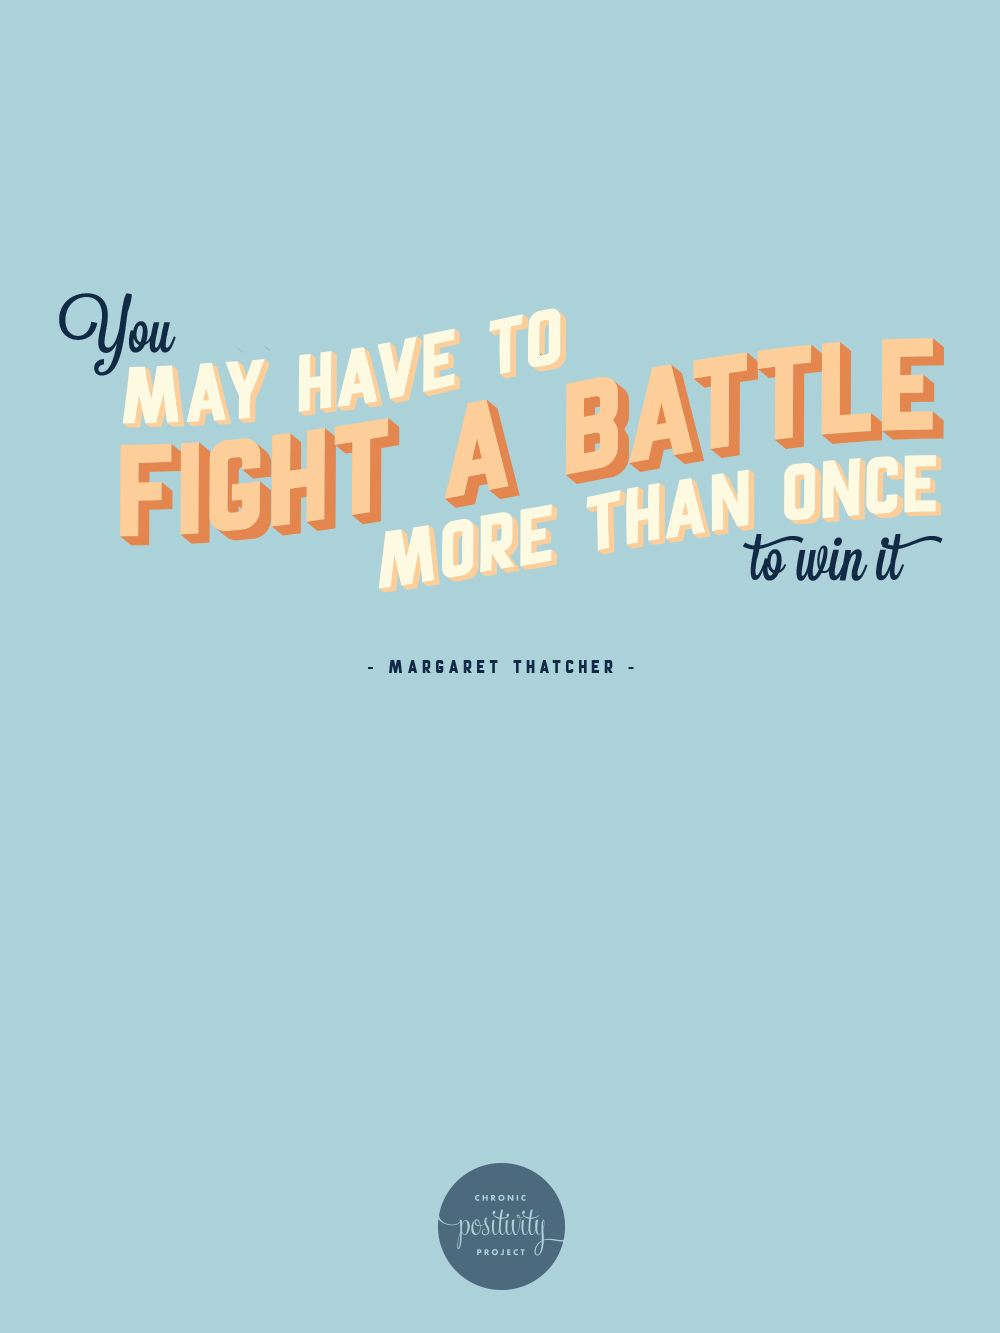 36: Fight a battle more than once